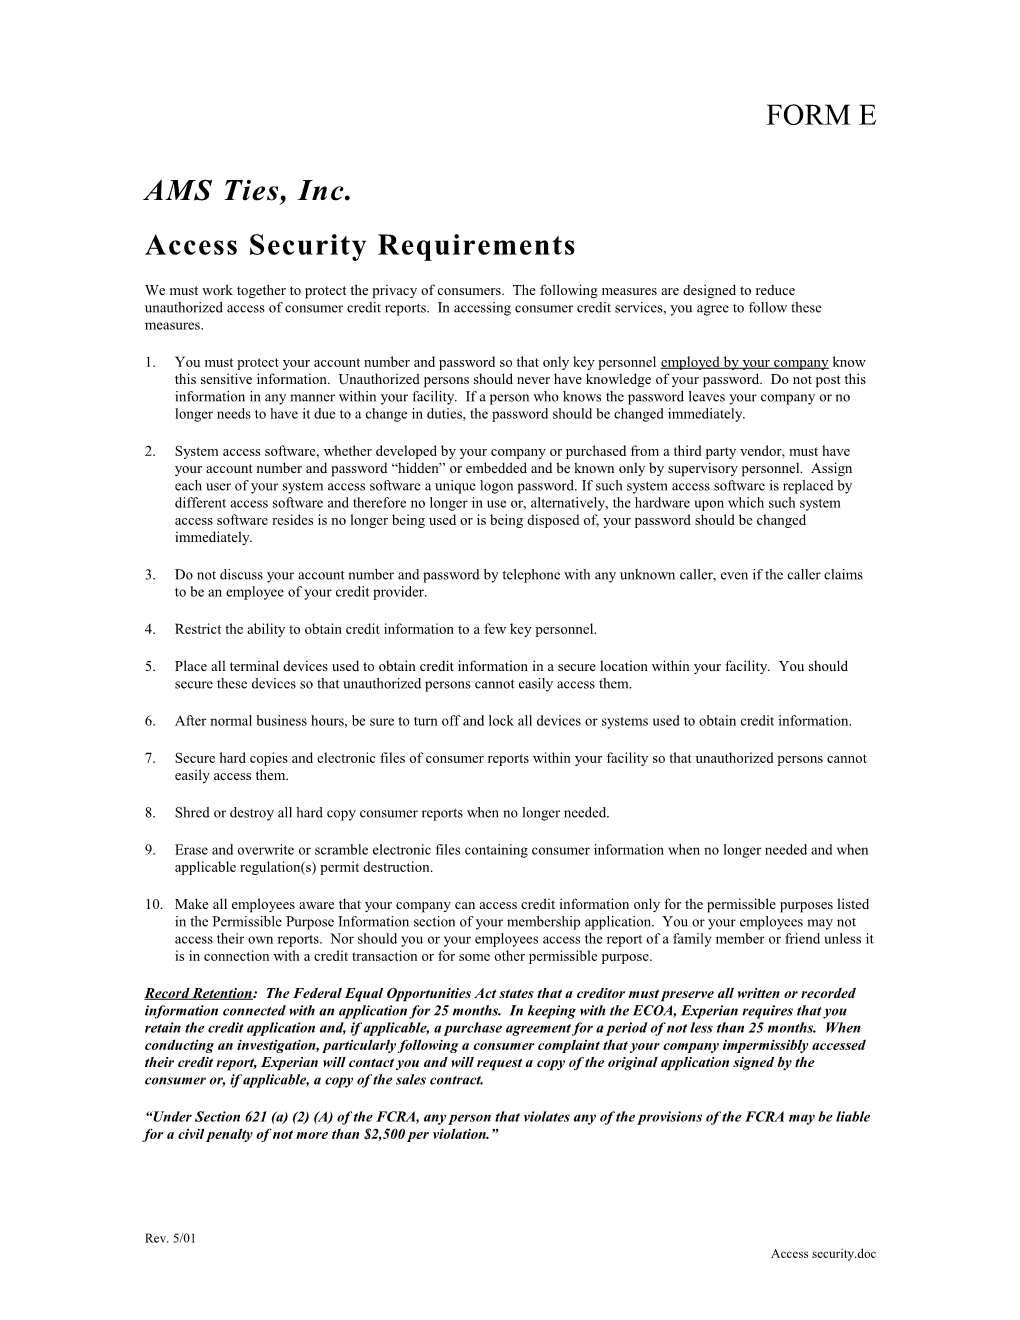 Access Security Requirements